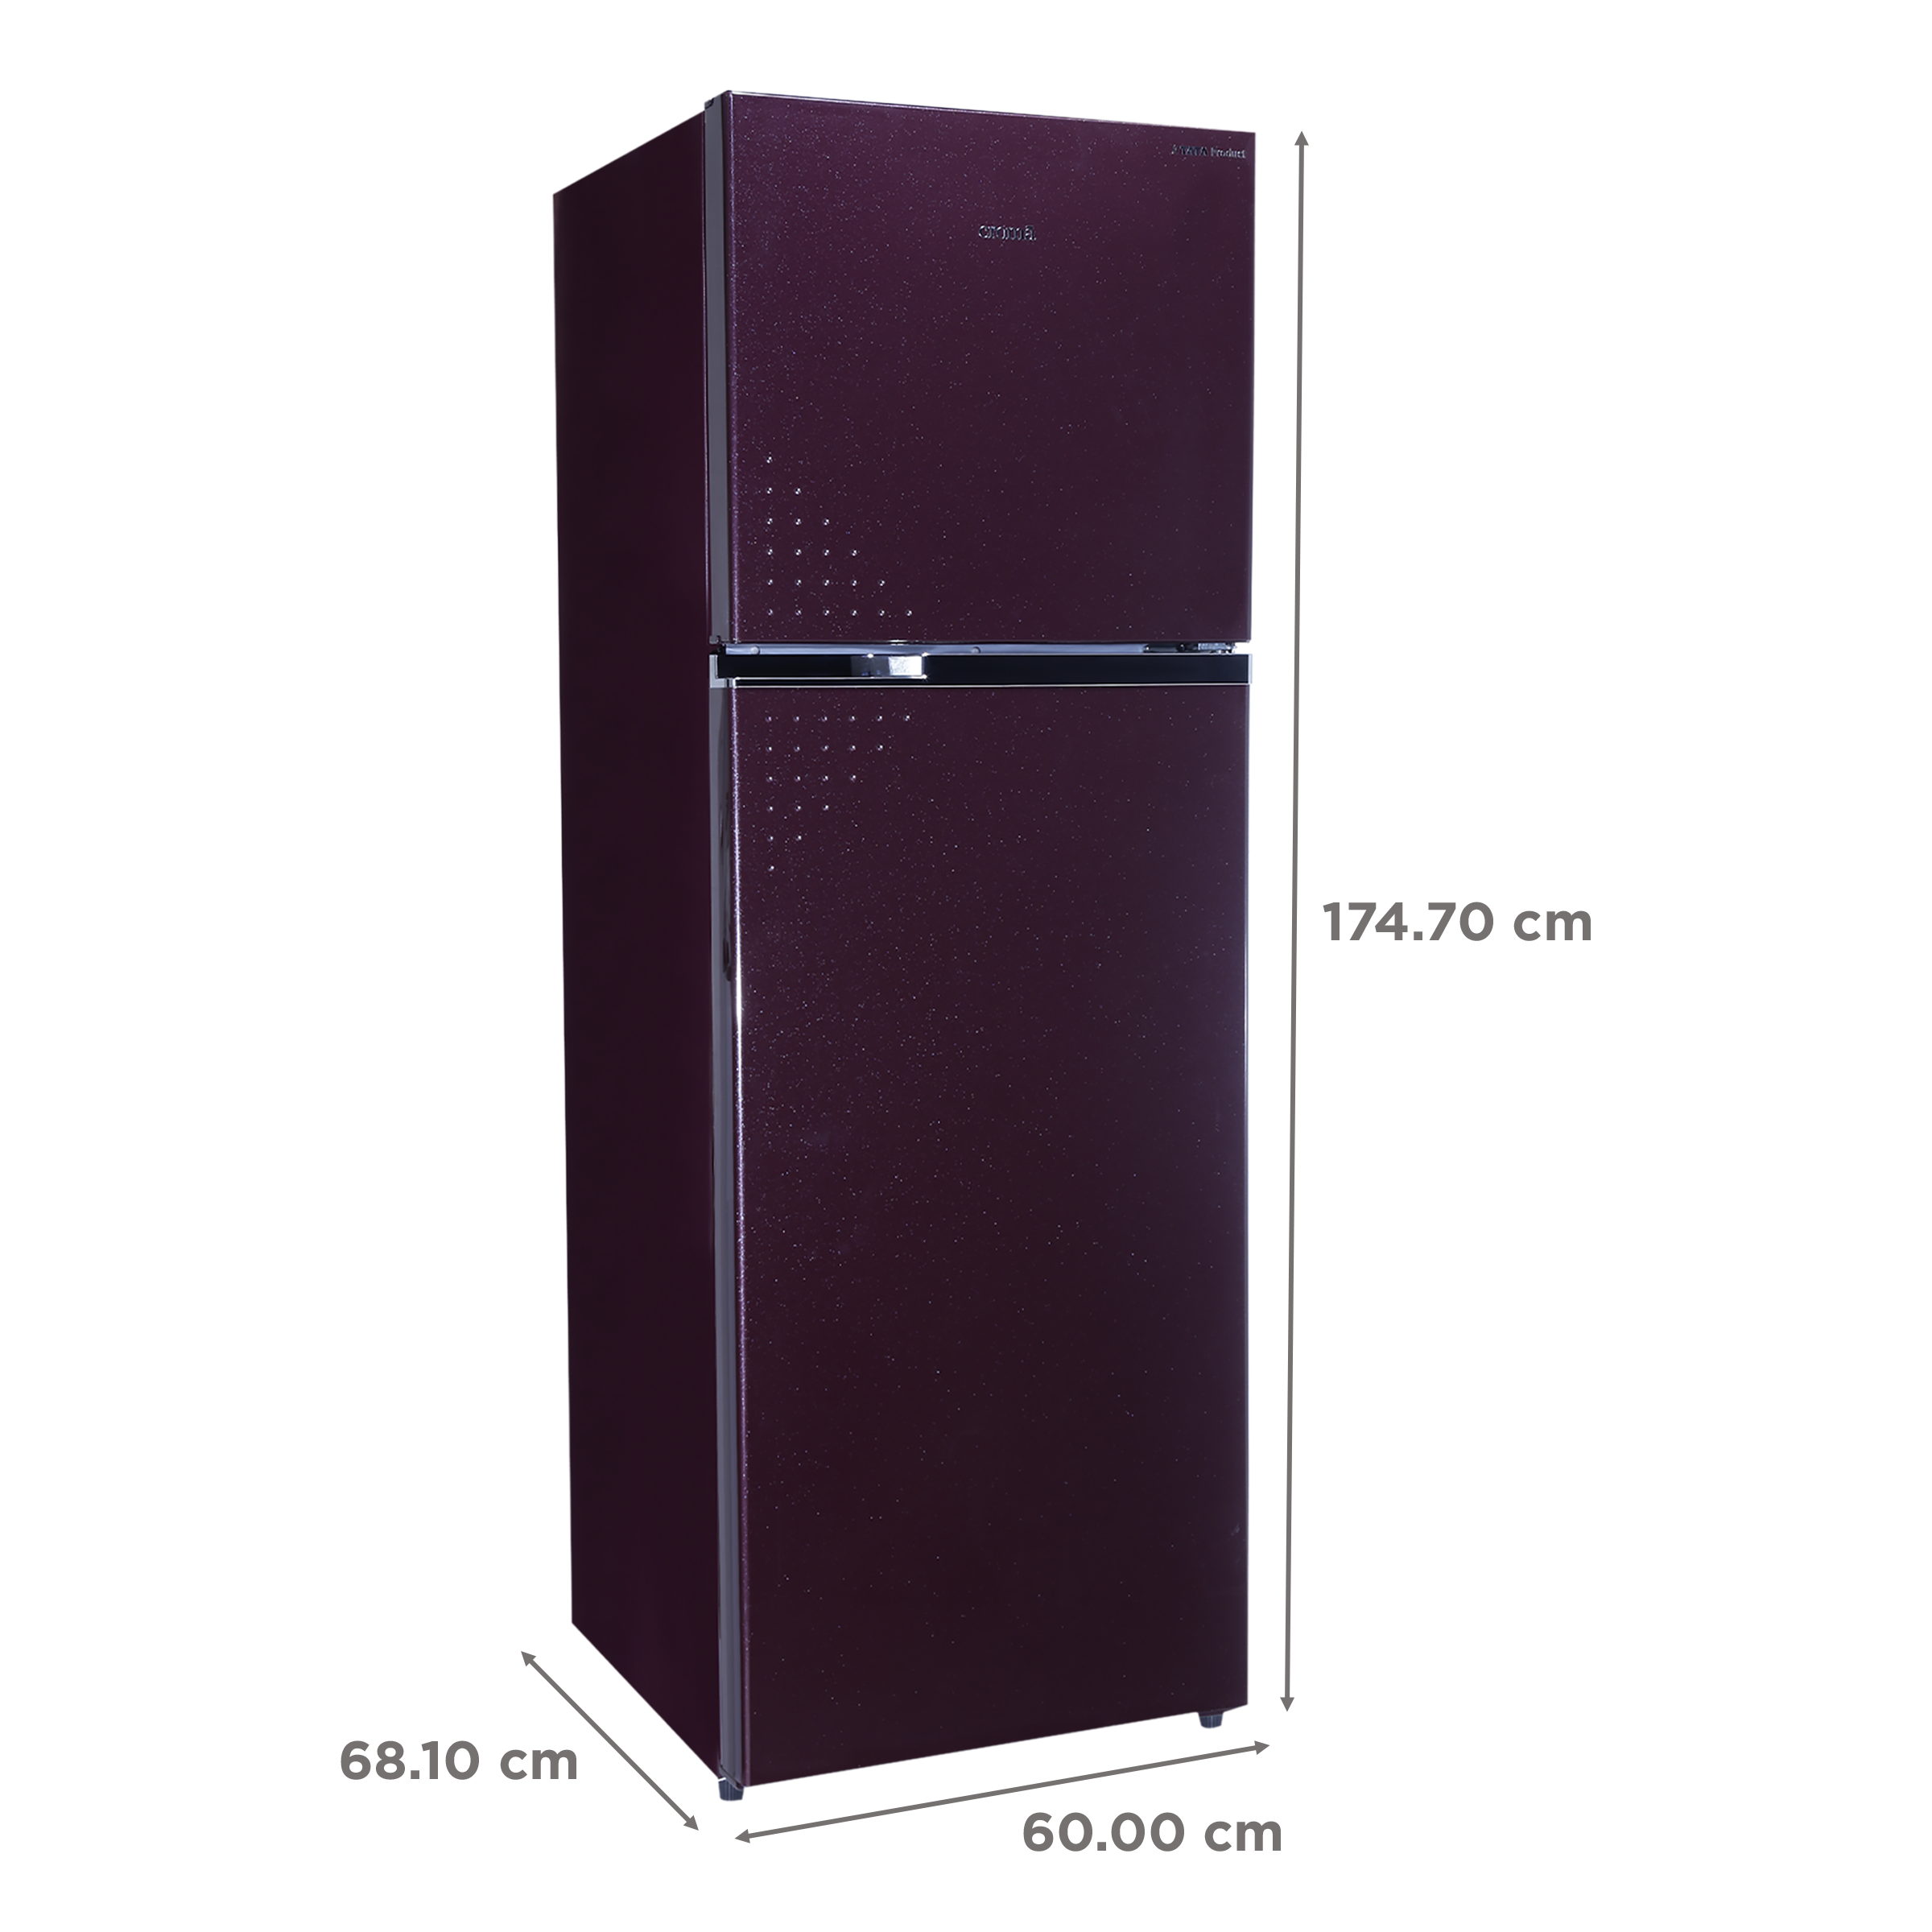 Croma 337 Litres 3 Star Frost Free Double Door Refrigerator with Large Vegetable Basket (CRLR340FFD259609, Wine Red)_3